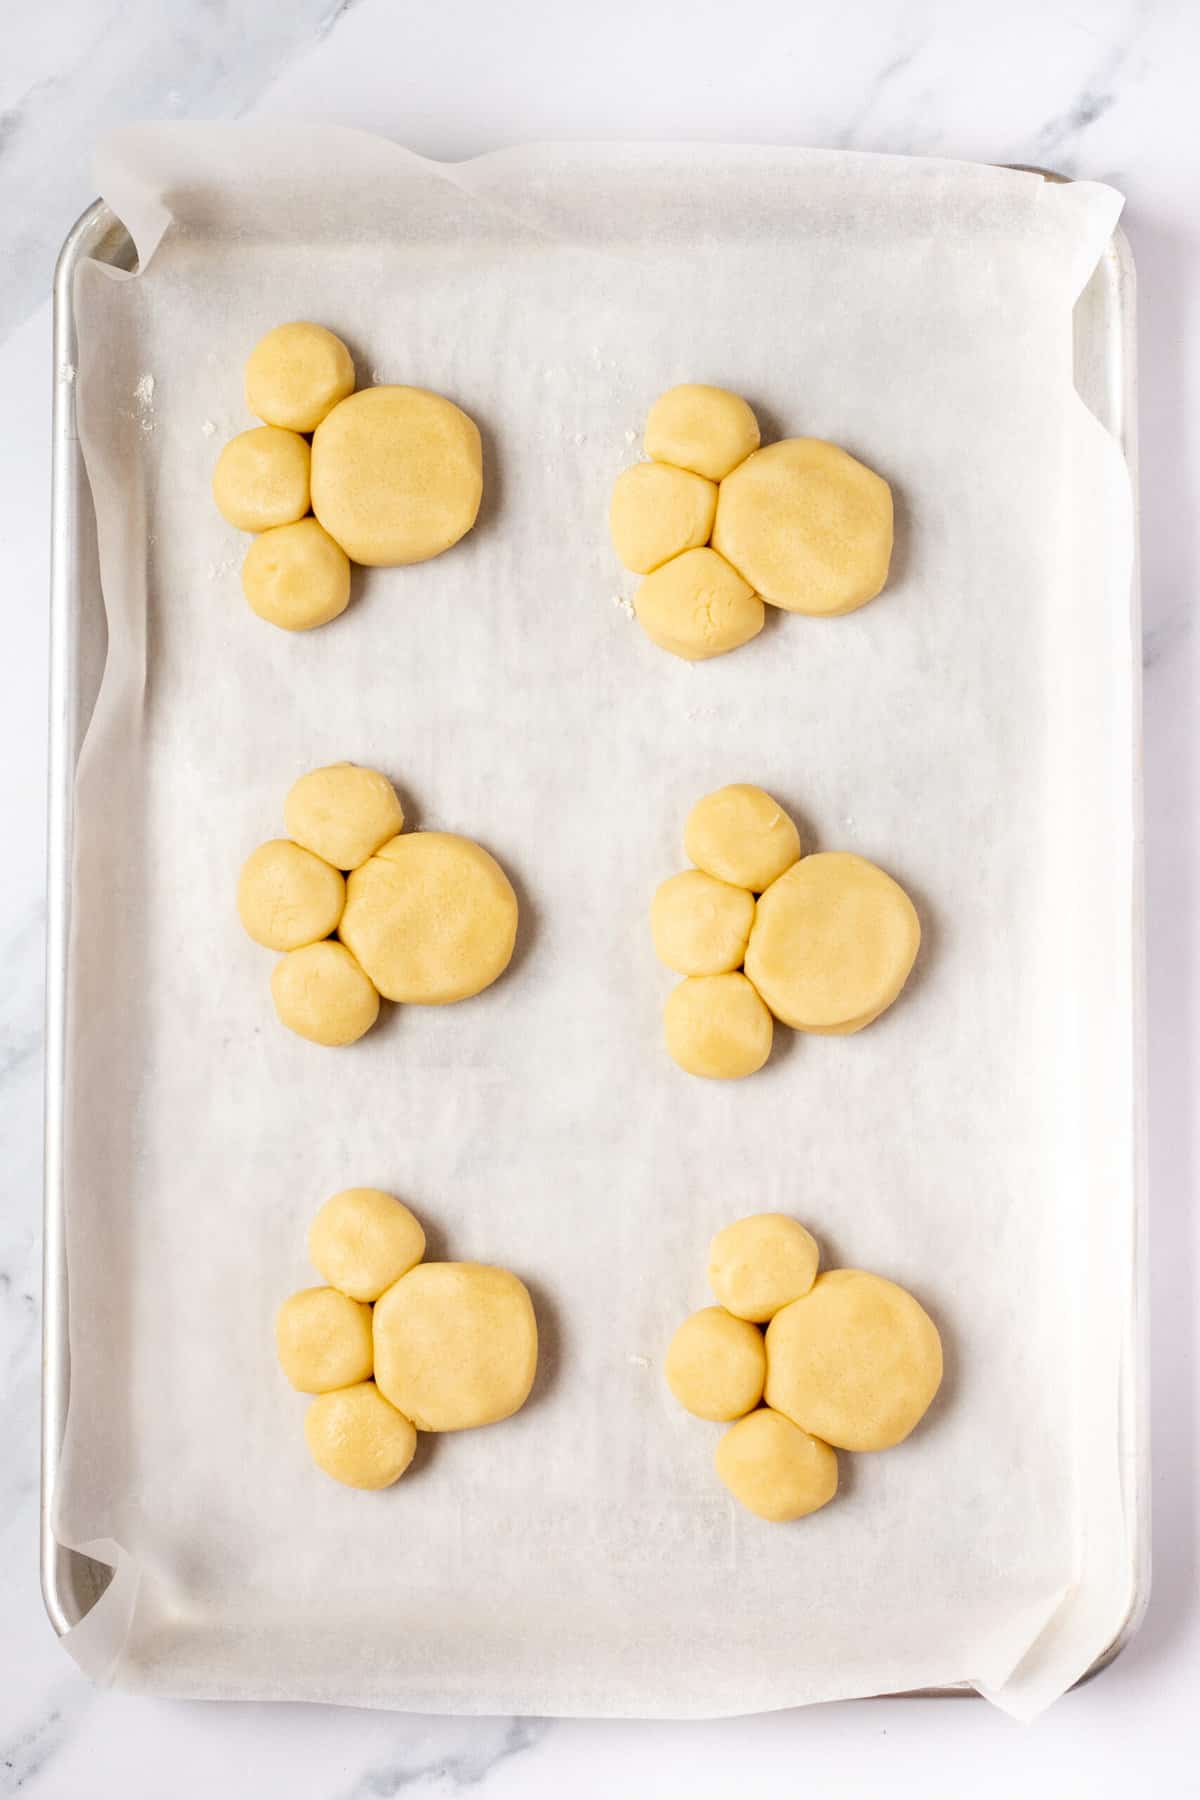 bunny paw cookies unbaked on a cookie sheet